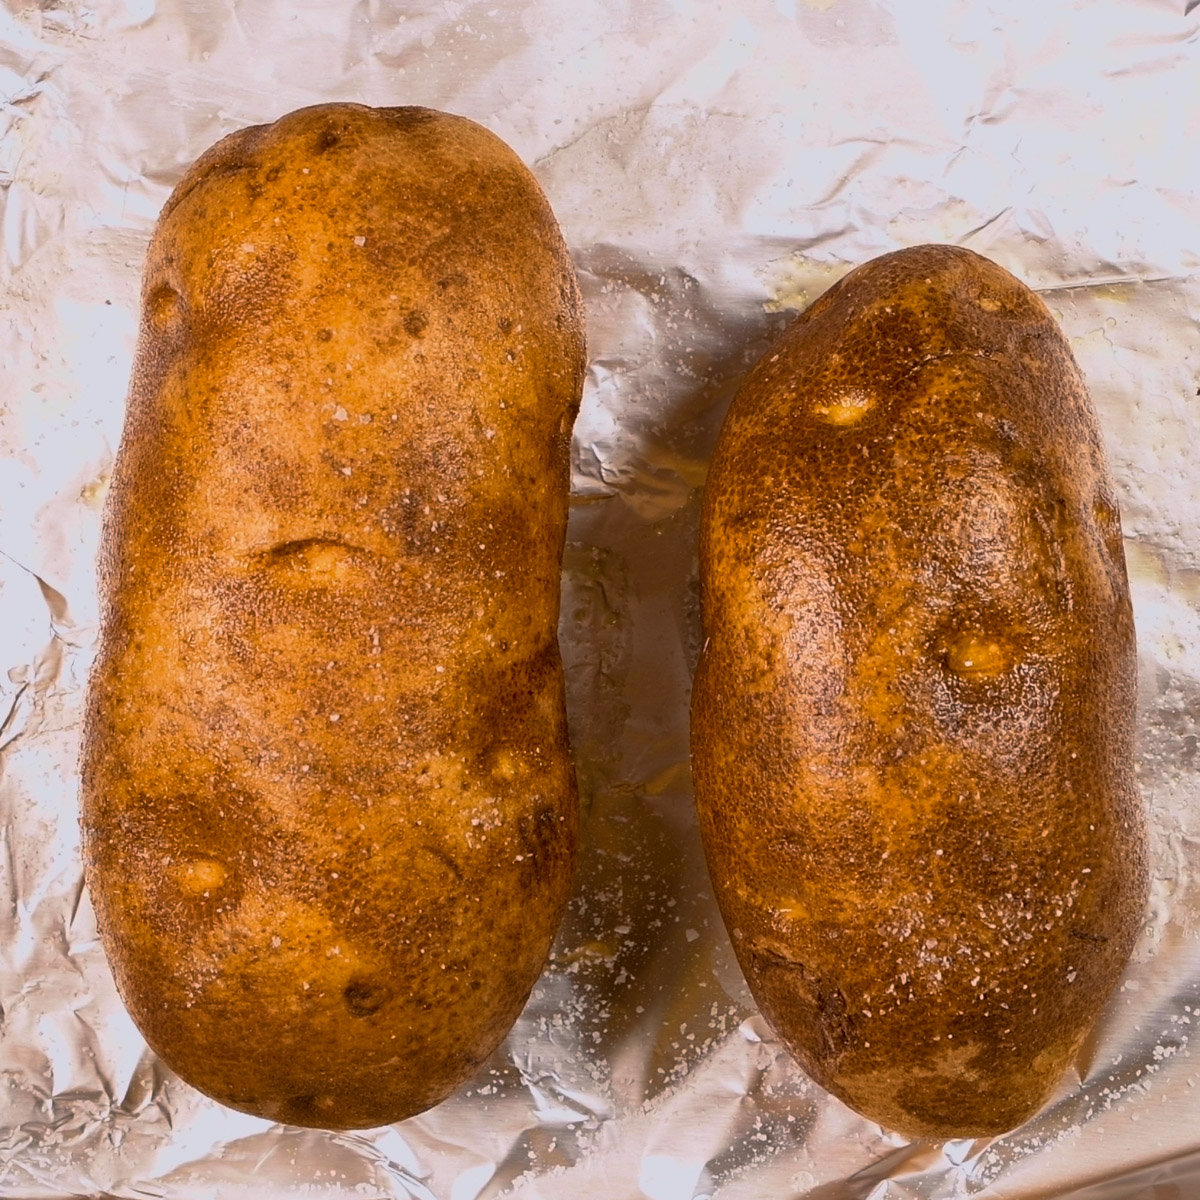 Bake the potatoes in the oven.